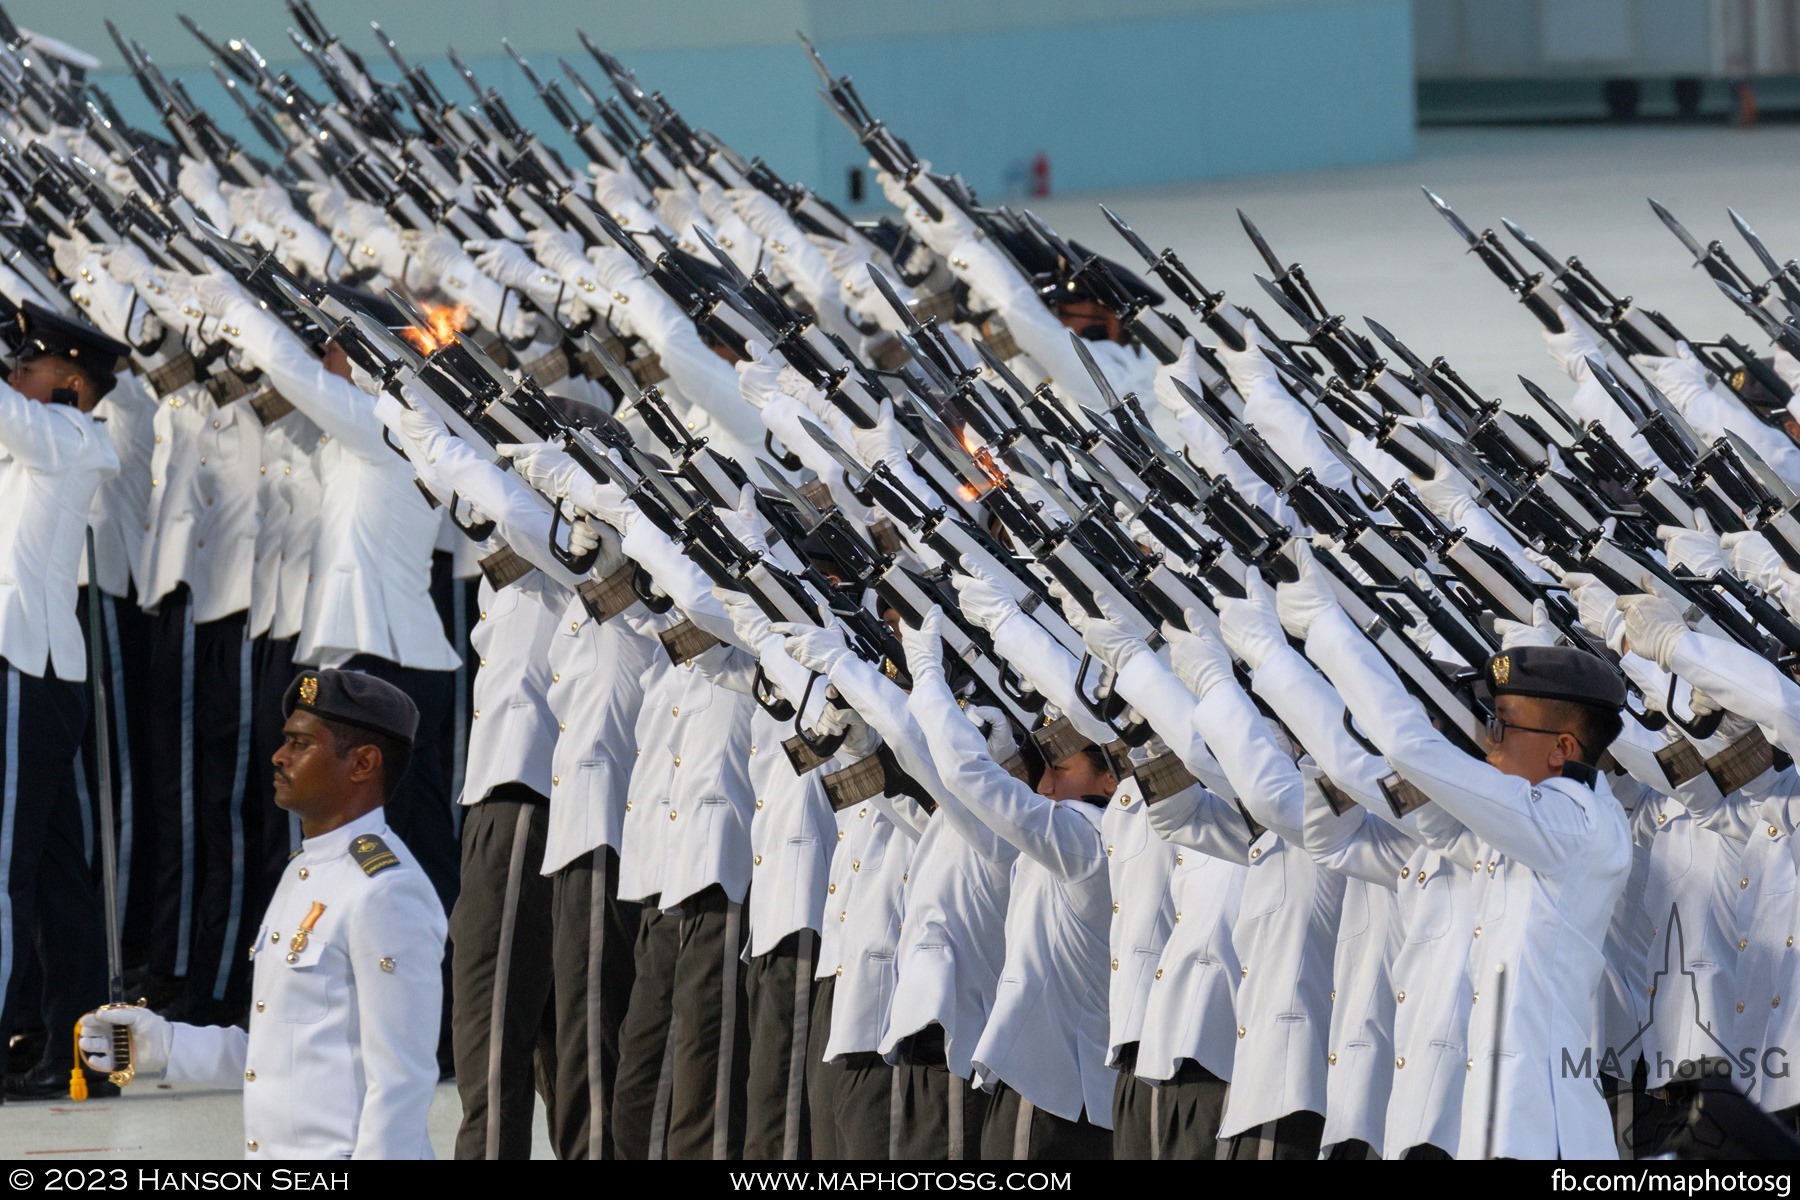 The DIS Guard-of-Honor firing the SAR-21 for the feu de joie.